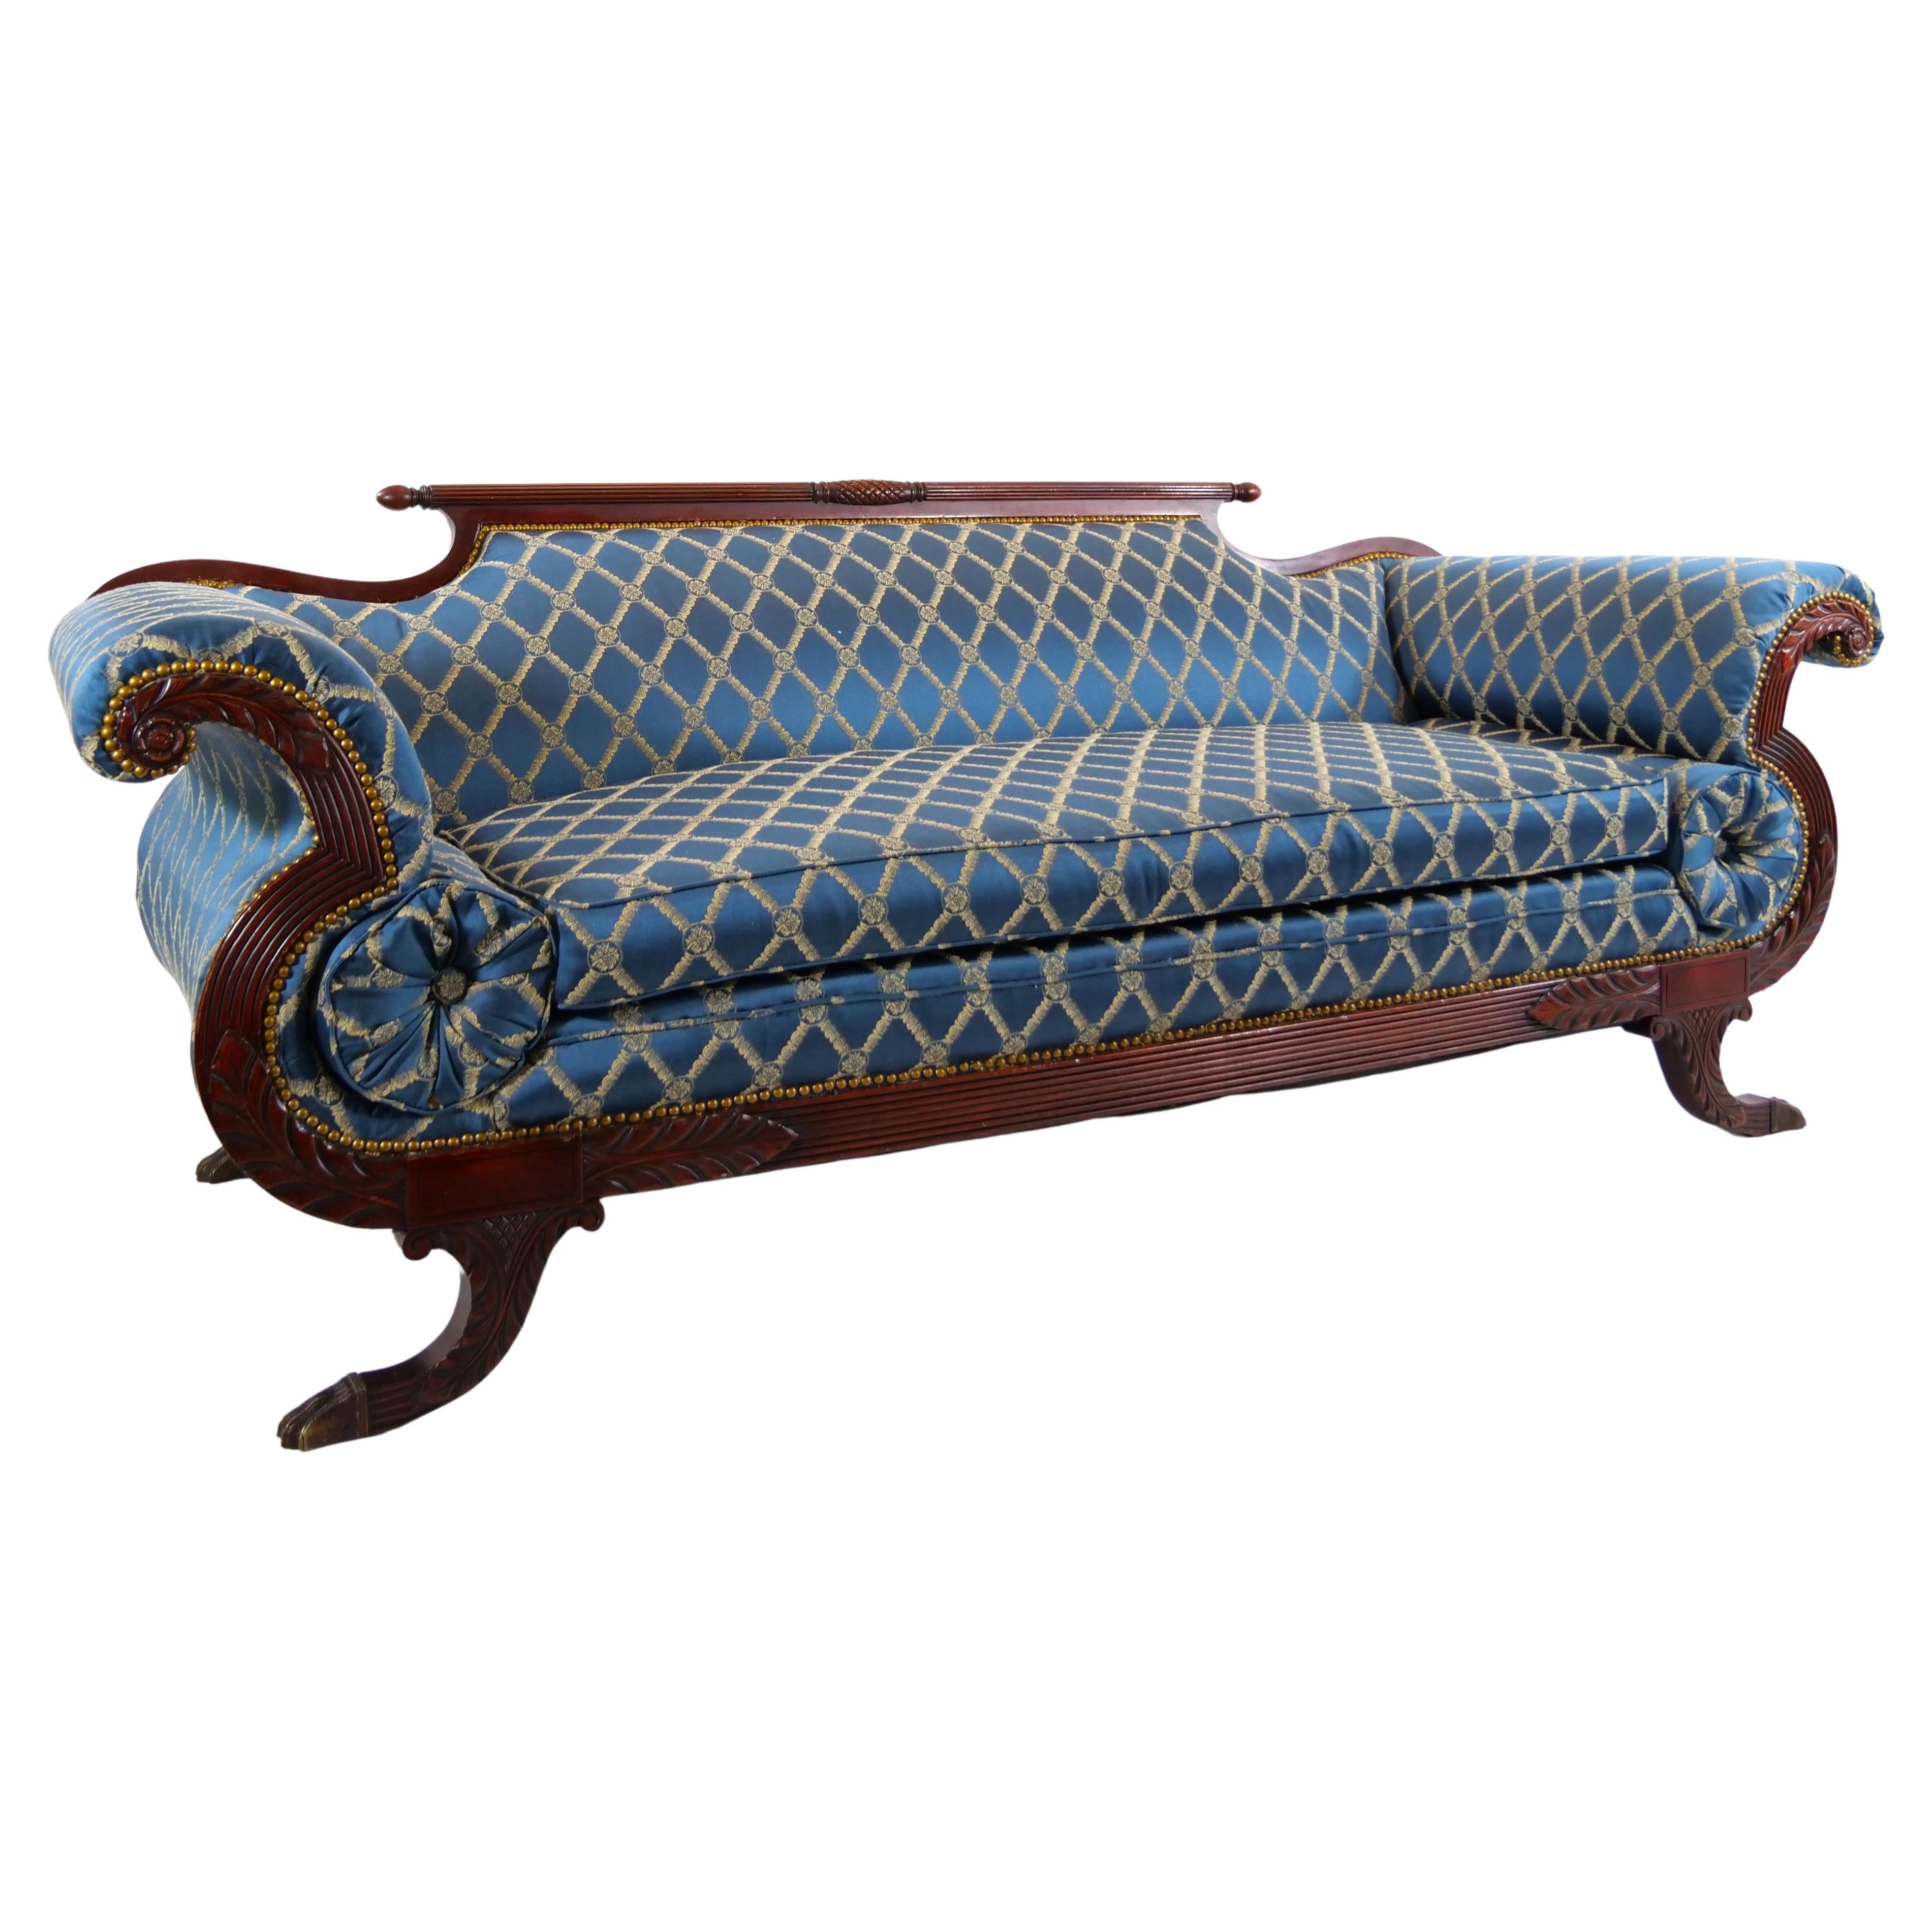 Very beautiful North American Empire style mahogany wood framed upholstered sofa with matching bolster pillows and mahogany frame scrolled arms and lions paw feet. The sofa is in great condition, just beautiful and roomy. The upholstery is very